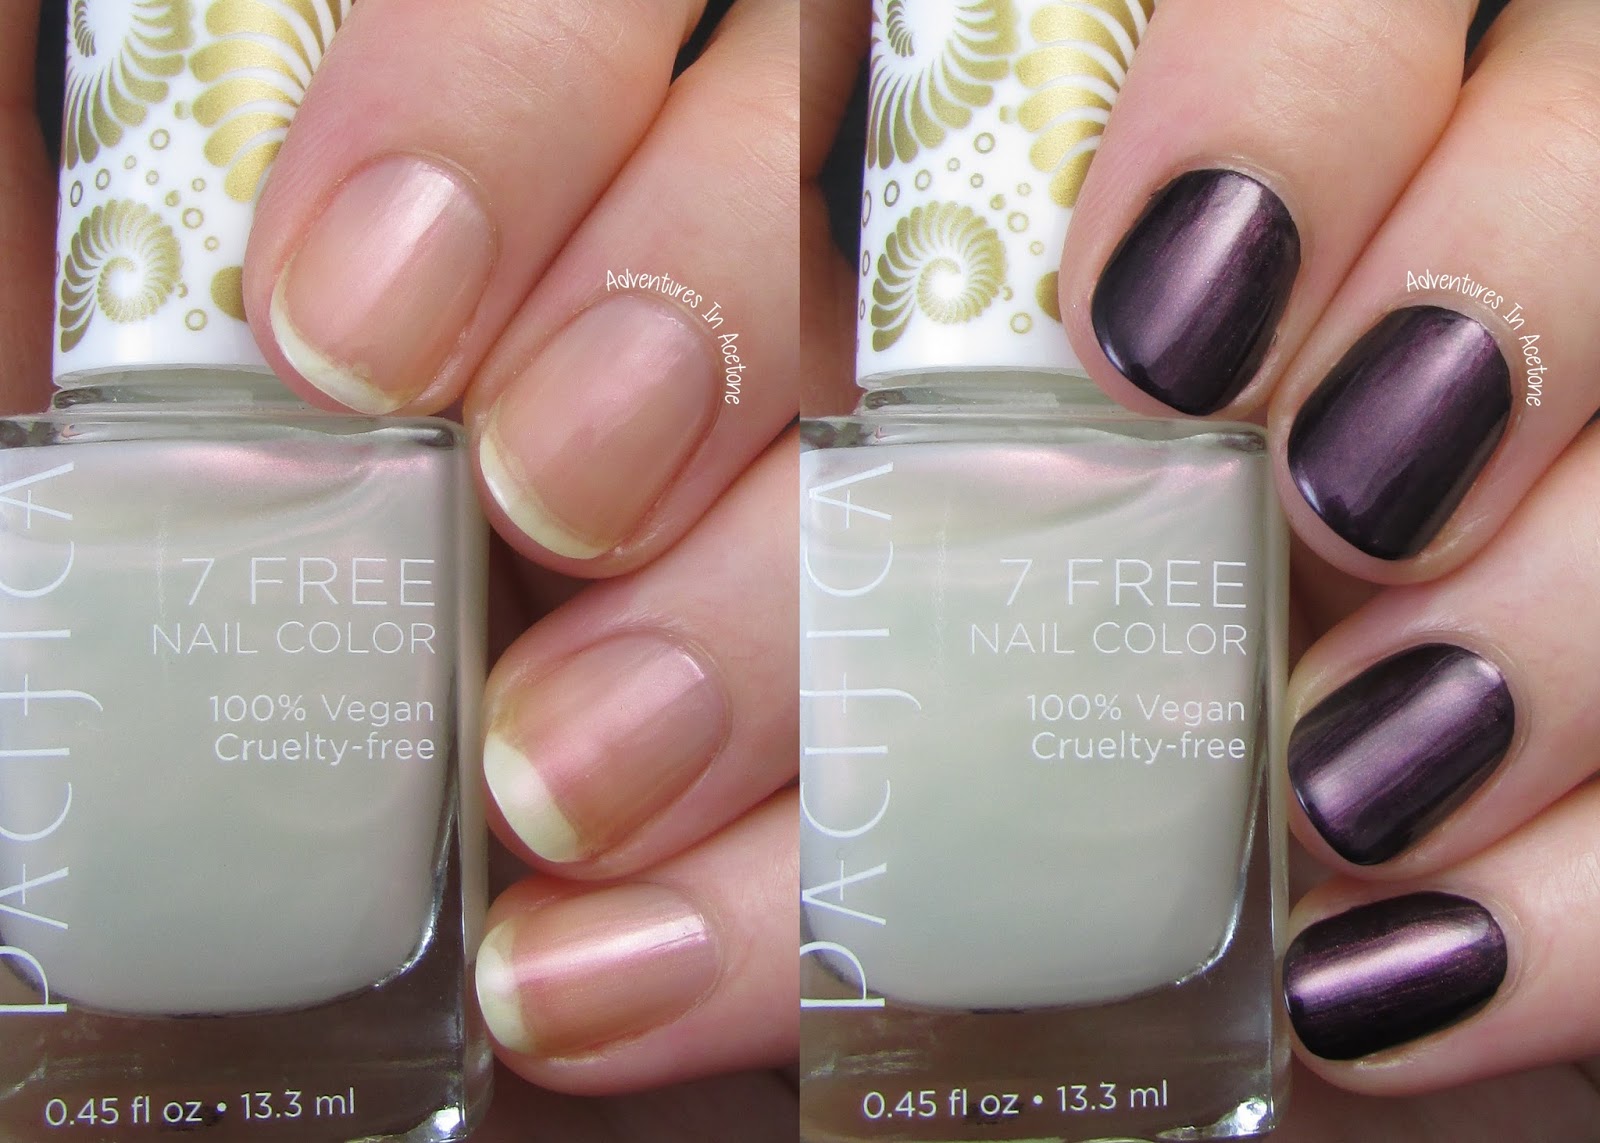 1. Pacifica 7 Free Nail Color Unicorn Horn - wide 4